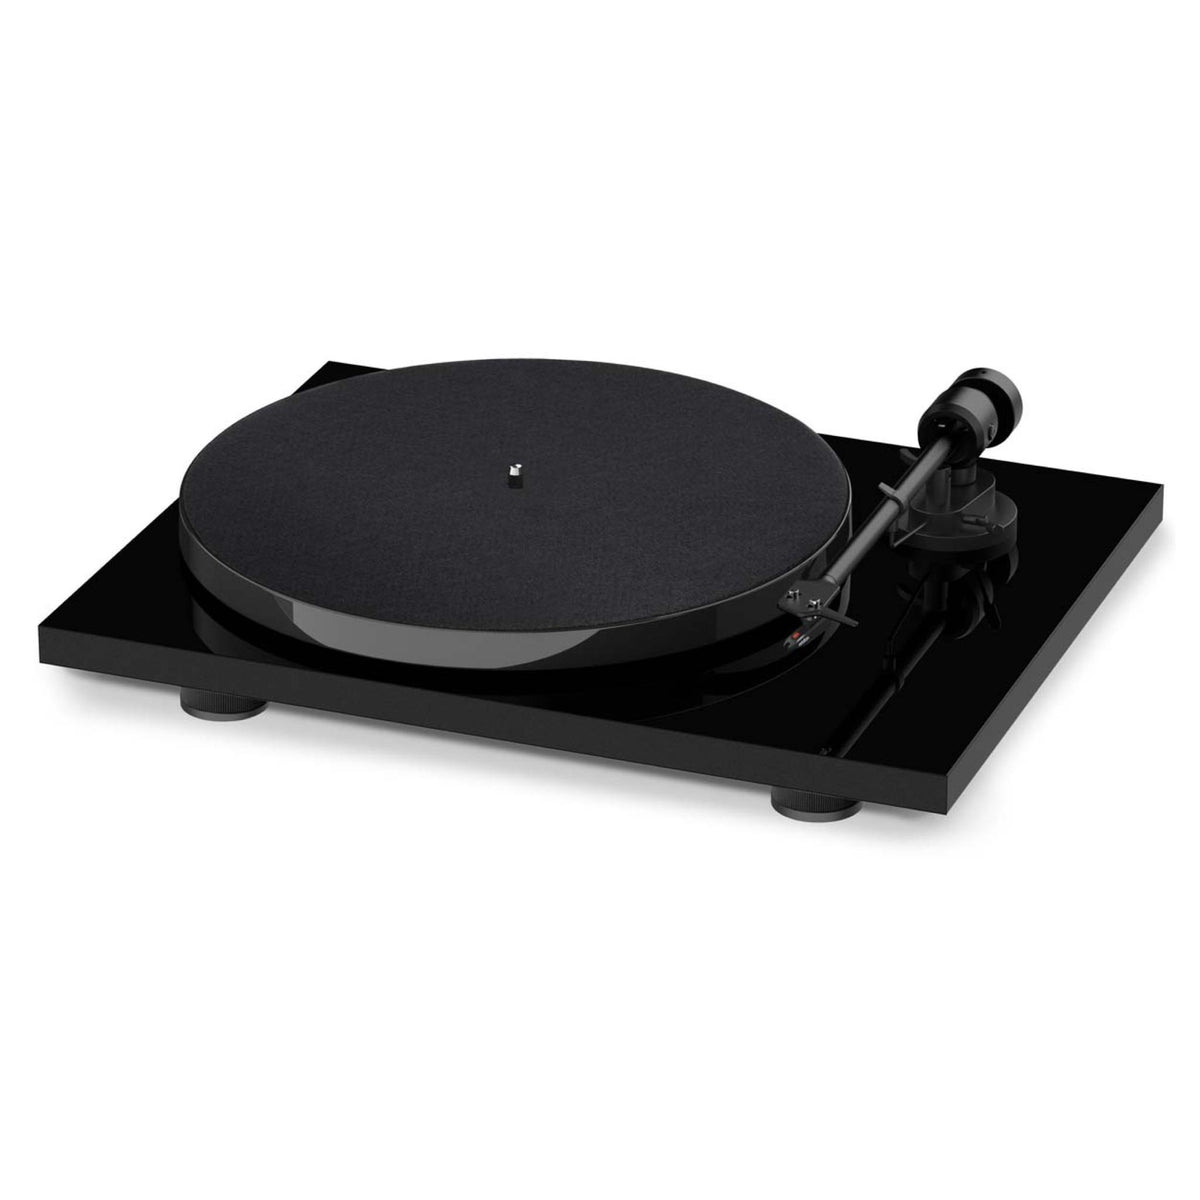 Turntable Review: Pro-Ject VTE-R vertical turntable